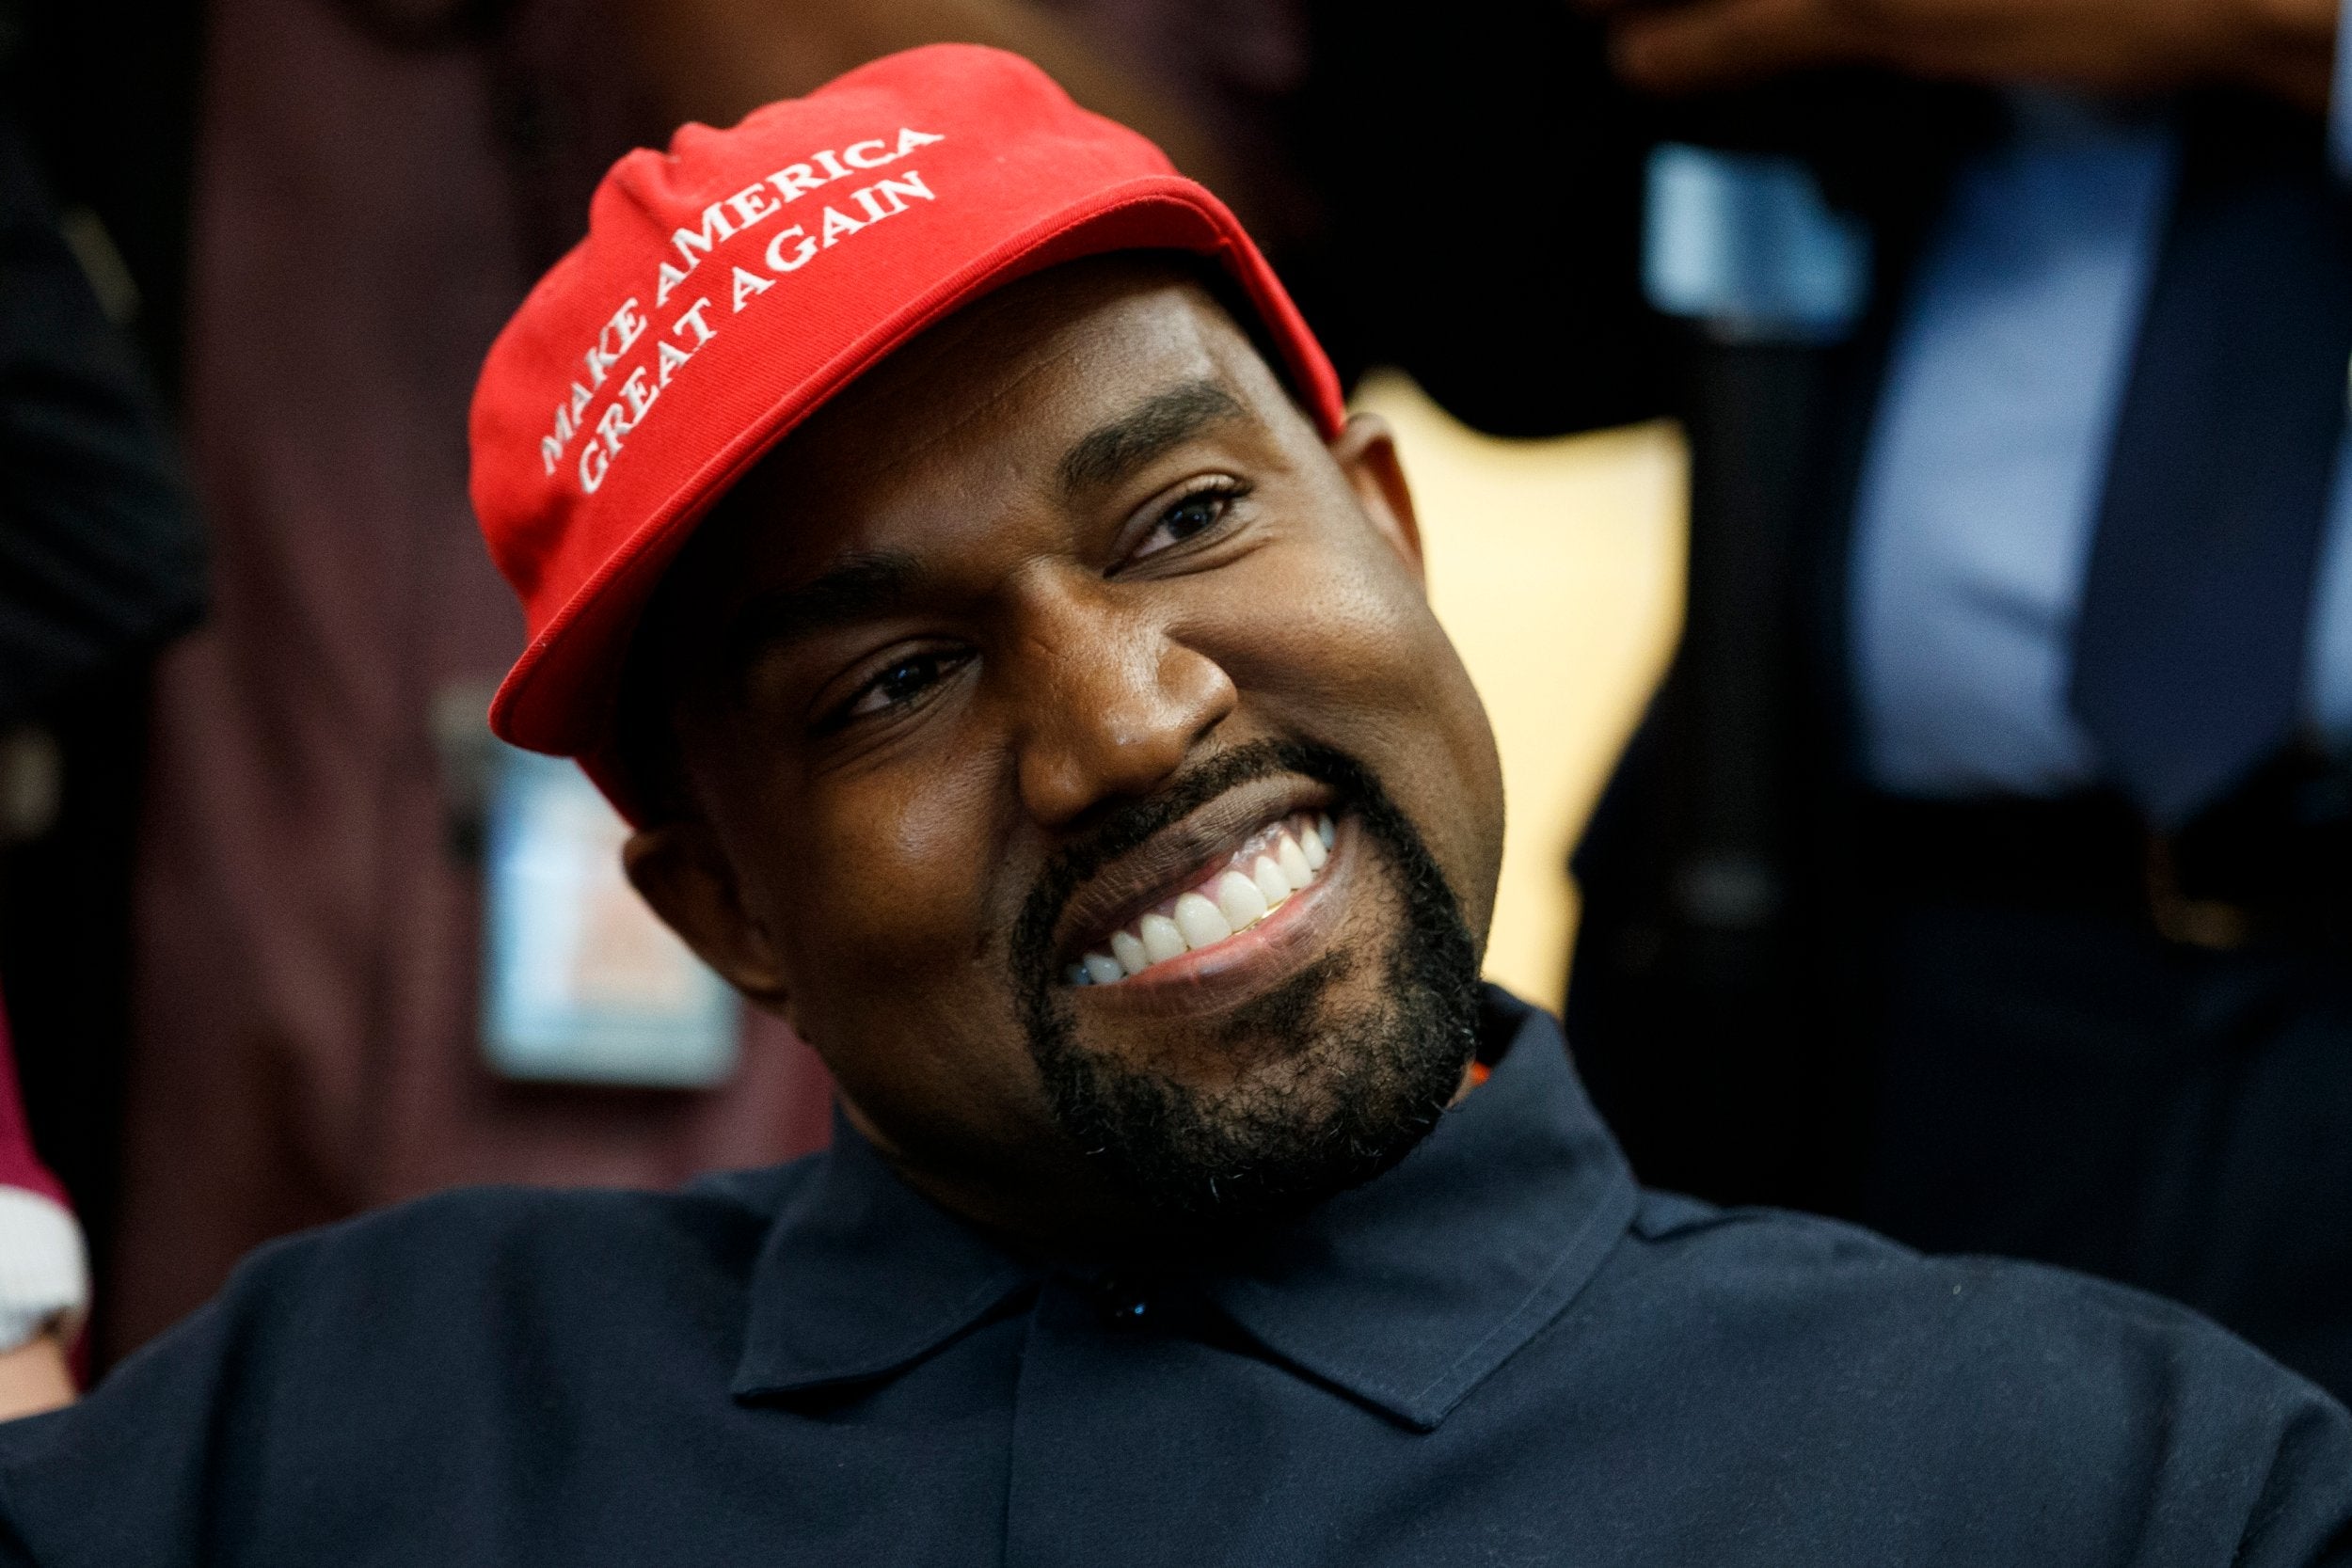 Related video: The most bizarre moments from Kanye West's meeting with Donald Trump at the White House